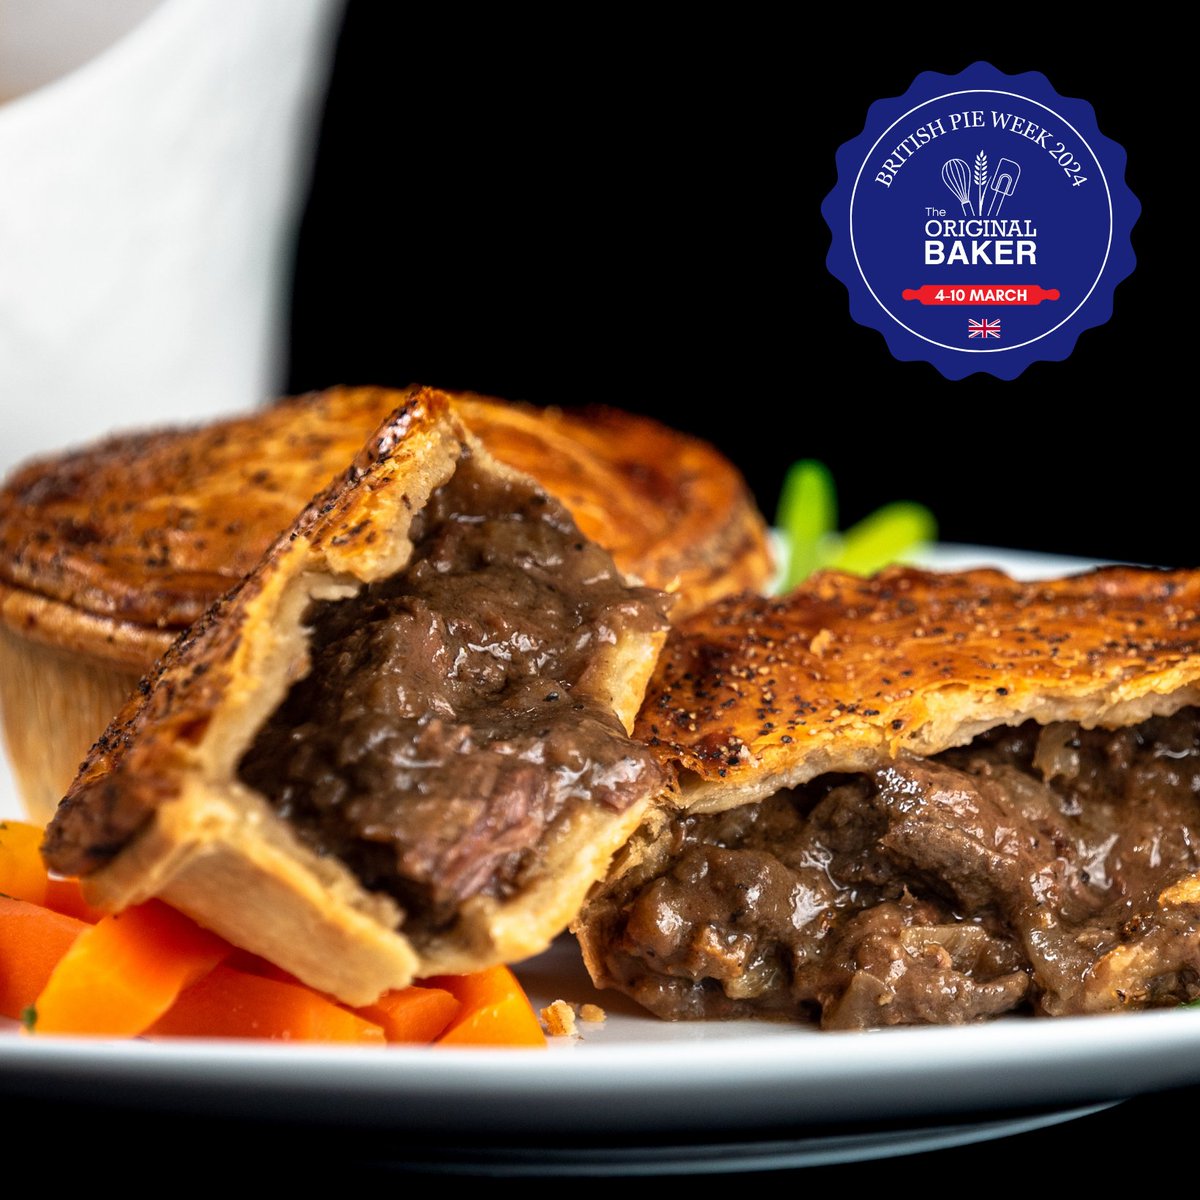 Next week is #BritishPieWeek and at The Original Baker, we're passionate about making proper pies!

With succulent meat and the finest, freshest vegetables encased in all-butter pastry, every #pie is packed full of flavour.

theoriginalbaker.co.uk/pages/tobpies

#pieweek #steakpie #pielover